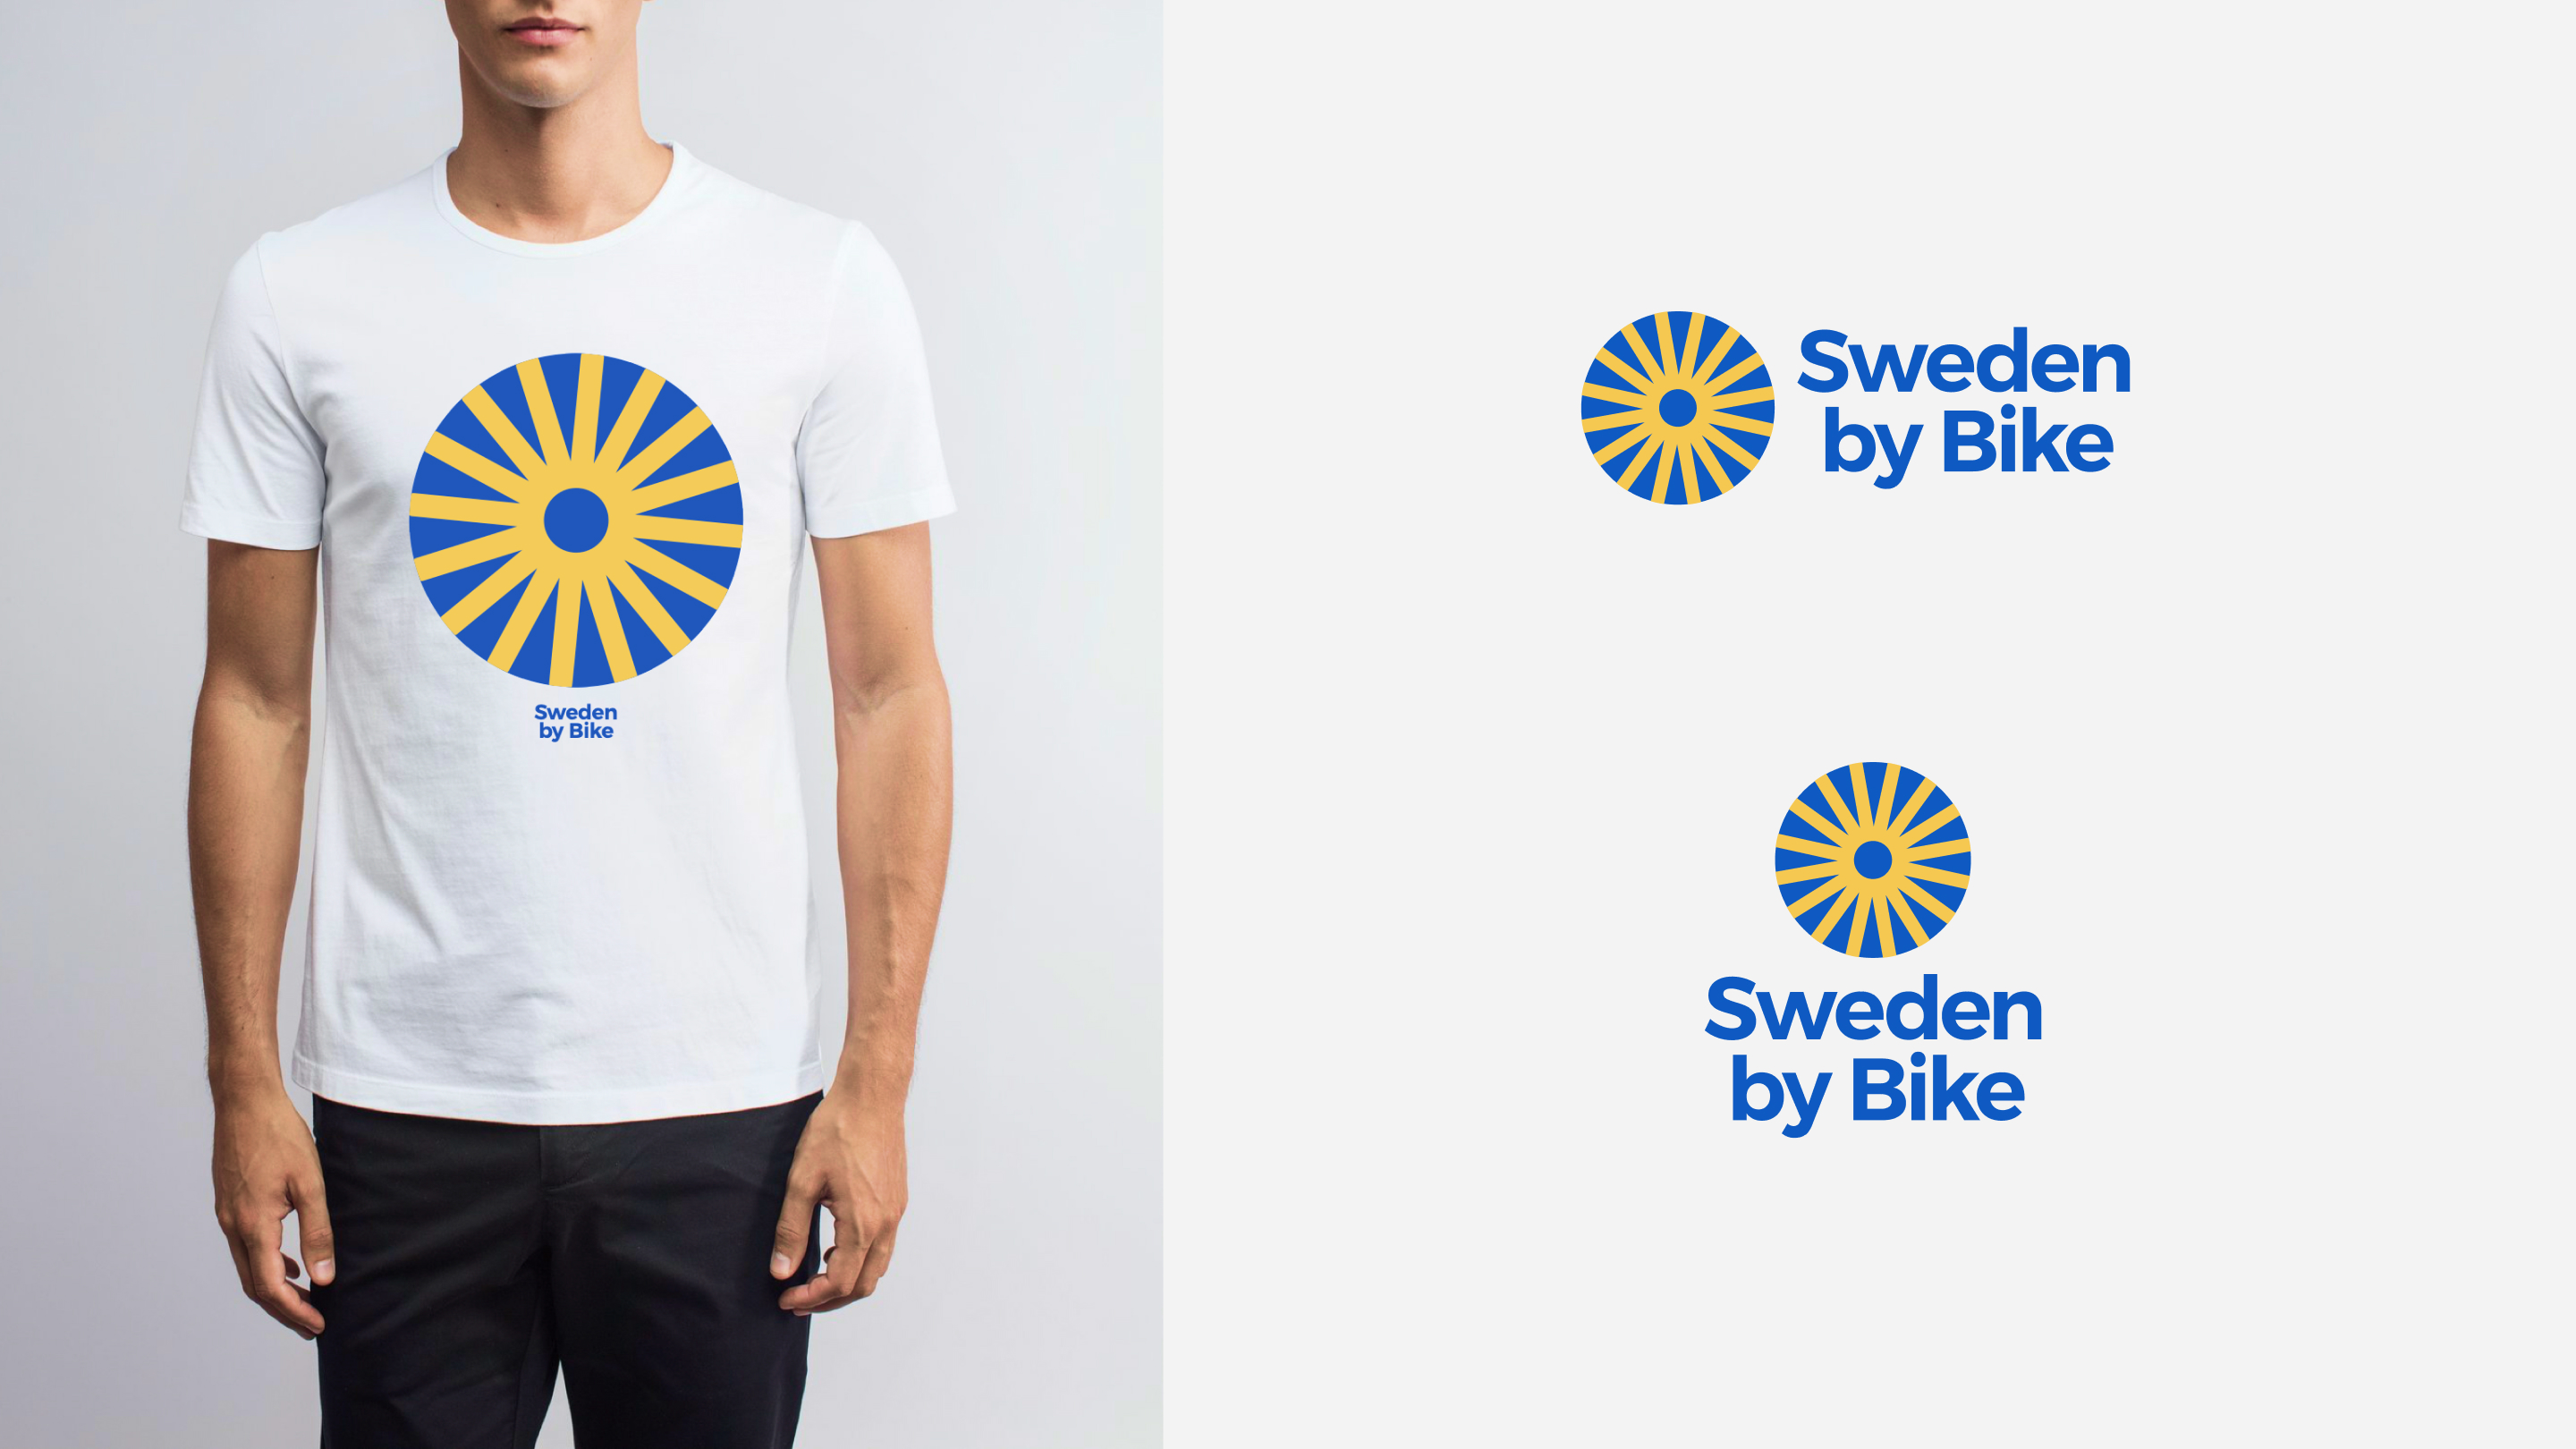 The graphic symbol of Sweden by Bike is central to the identity. Combining the spokes of a bicycle wheel with the Swedish flag.